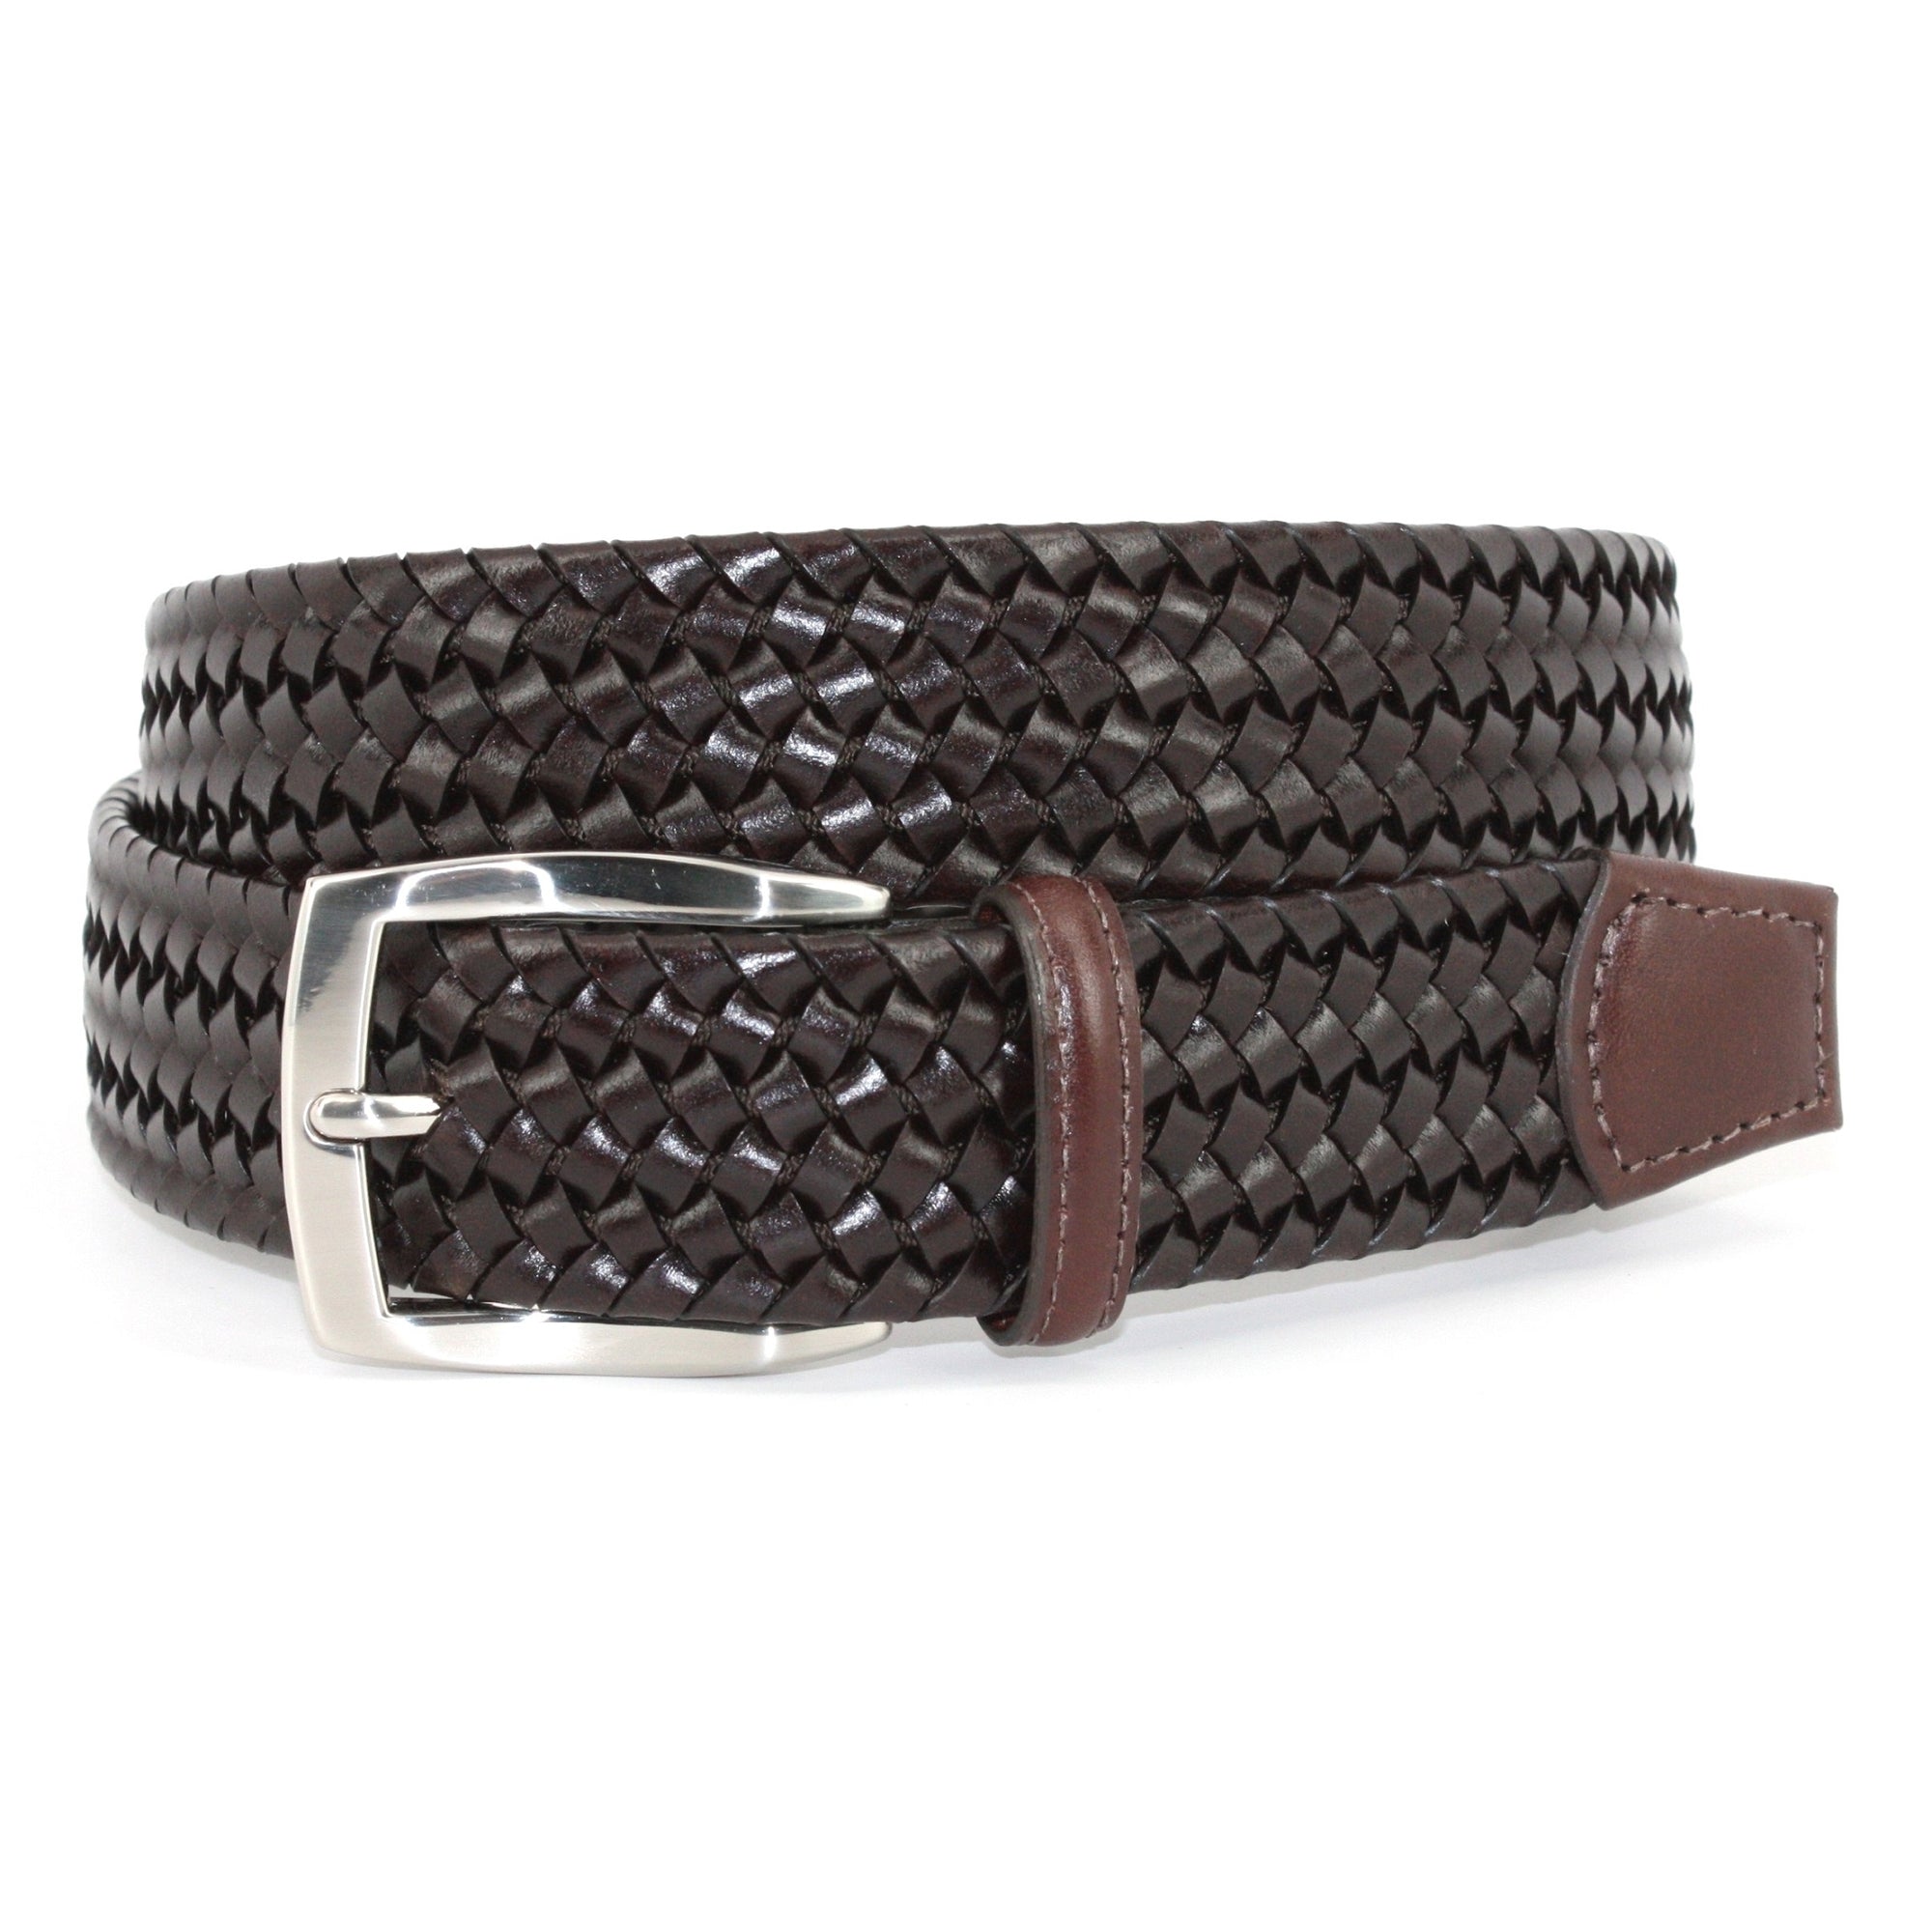 Italian Woven Stretch Leather Belt in Brown by Torino Leather